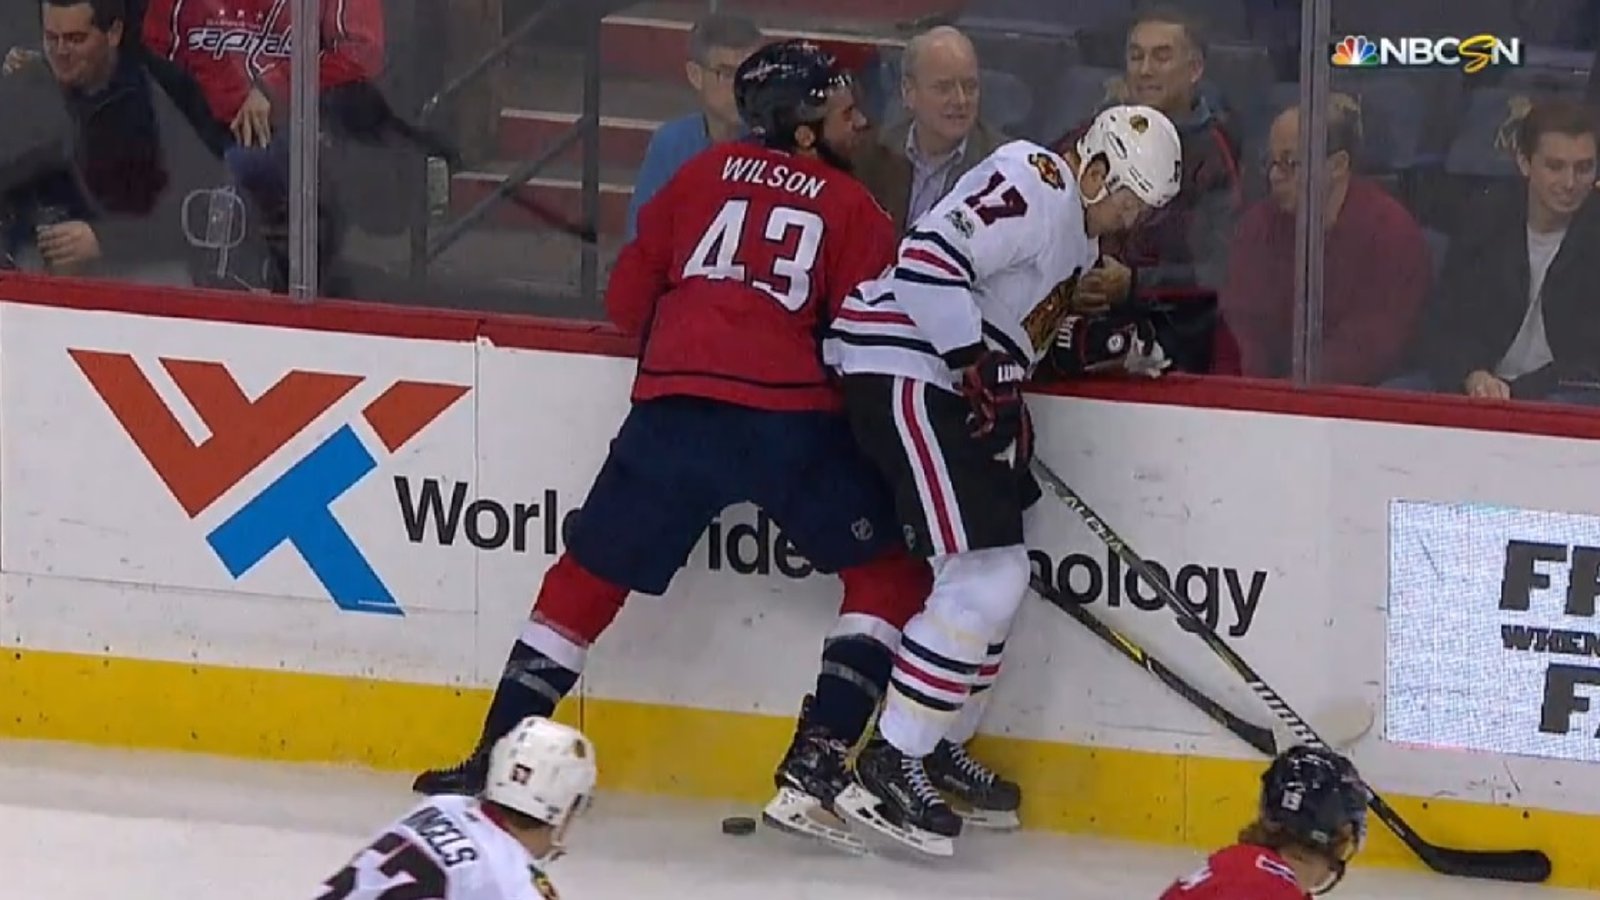 Breaking: Tough guy Tom Wilson injured after big hit along the boards.